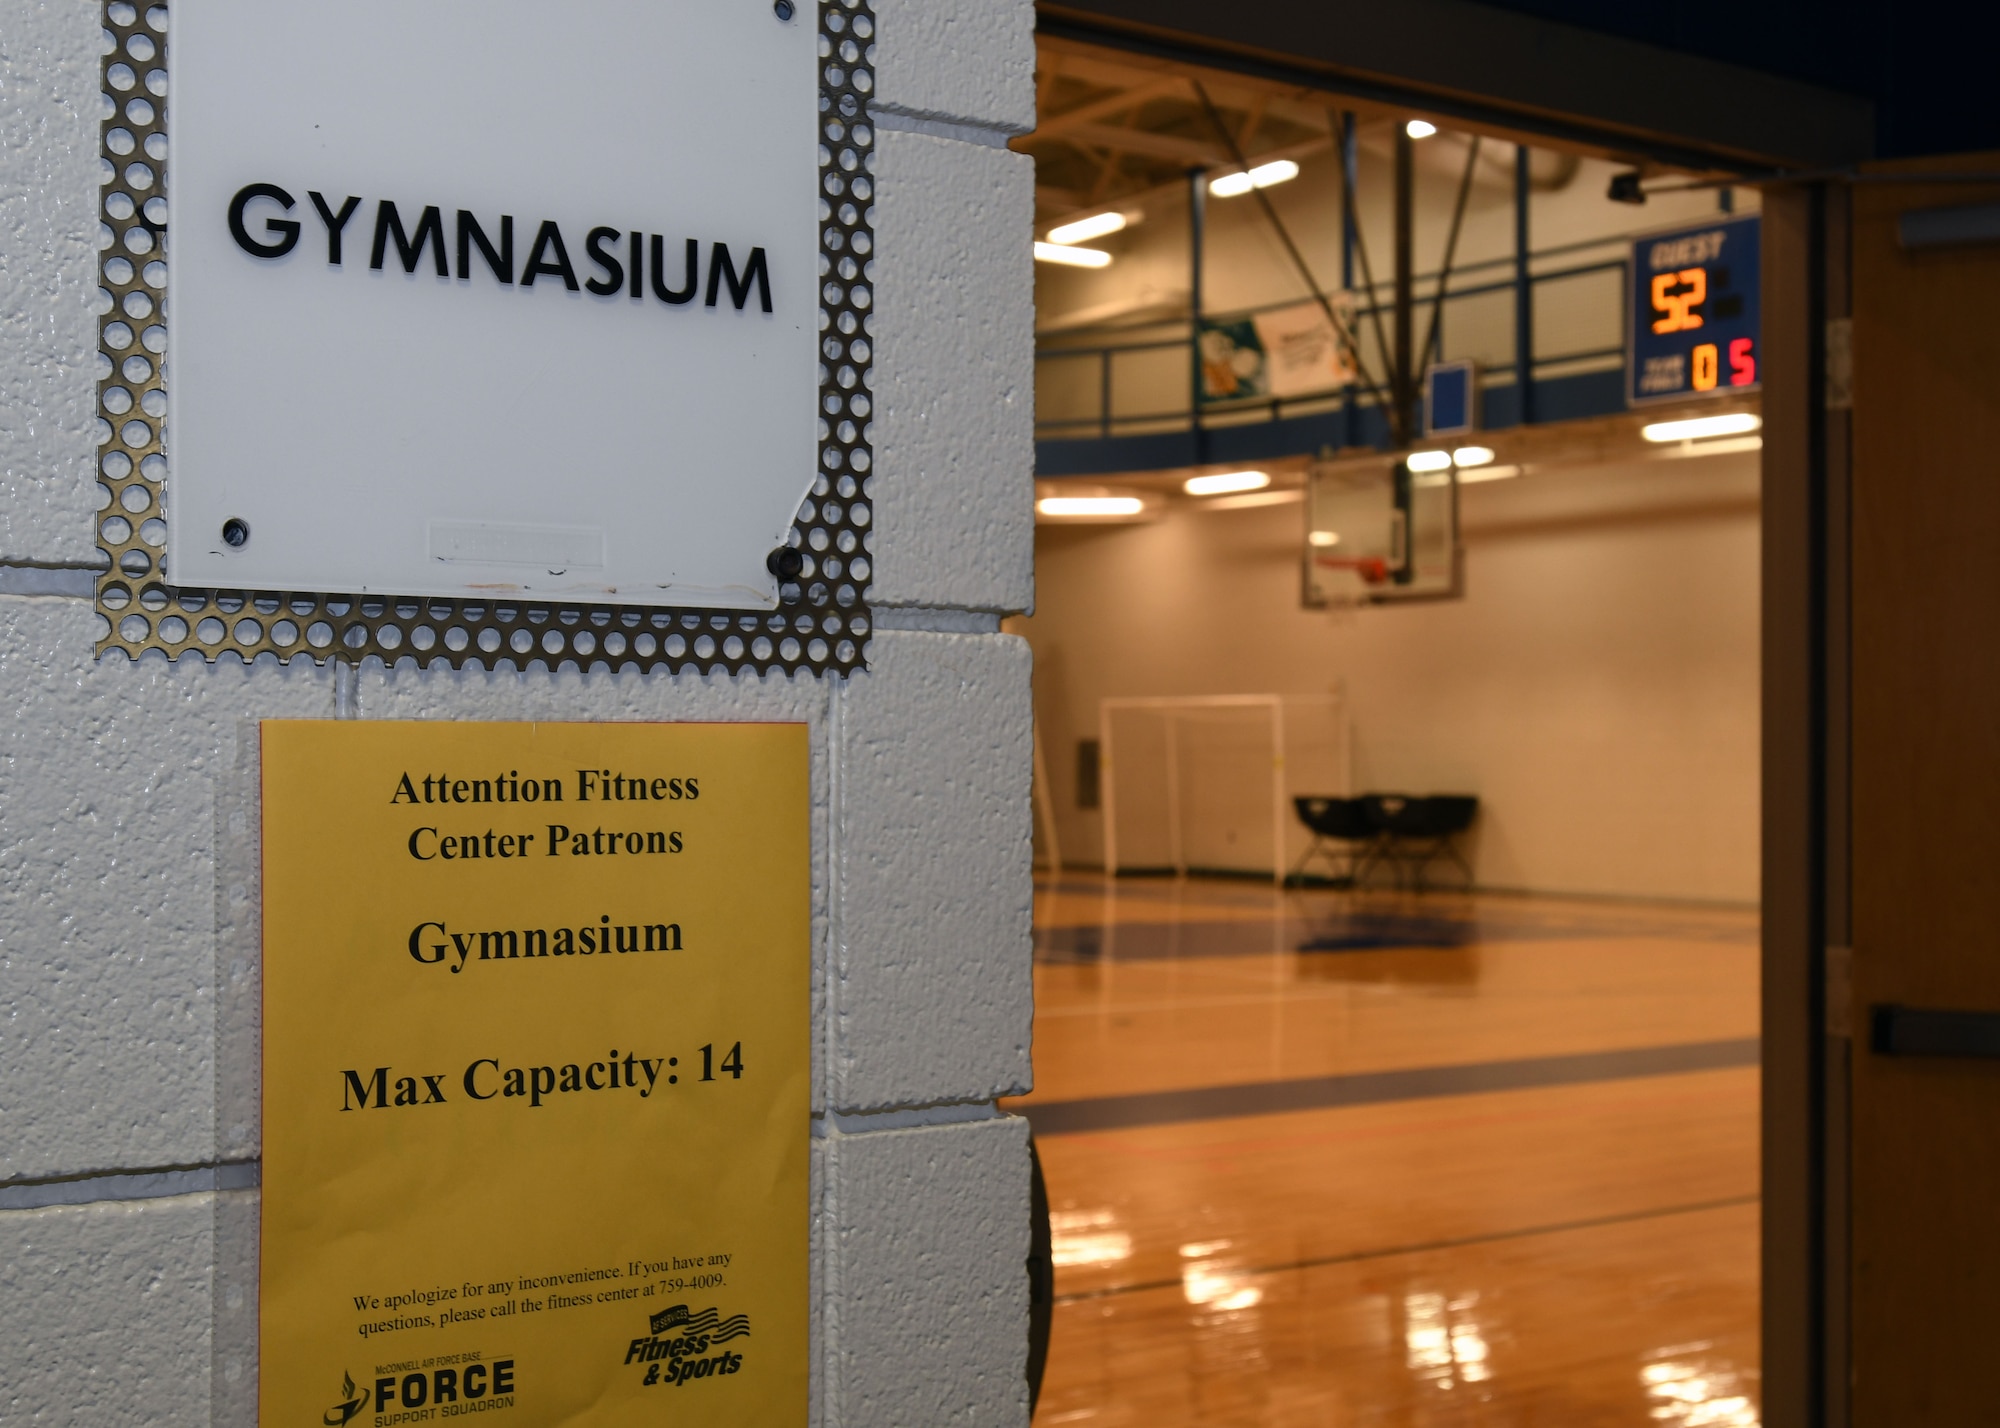 The entry way of the gymnasium bears a new sign which informs customers of the maximum number of occupants authorized inside at a time June 19, 2020, at McConnell Air Force Base, Kansas. The facility opened with limitations while still giving Airmen options to stay fit and safe during the pandemic. (U.S. Air Force photo by Tech. Sgt. Jennifer Stai)